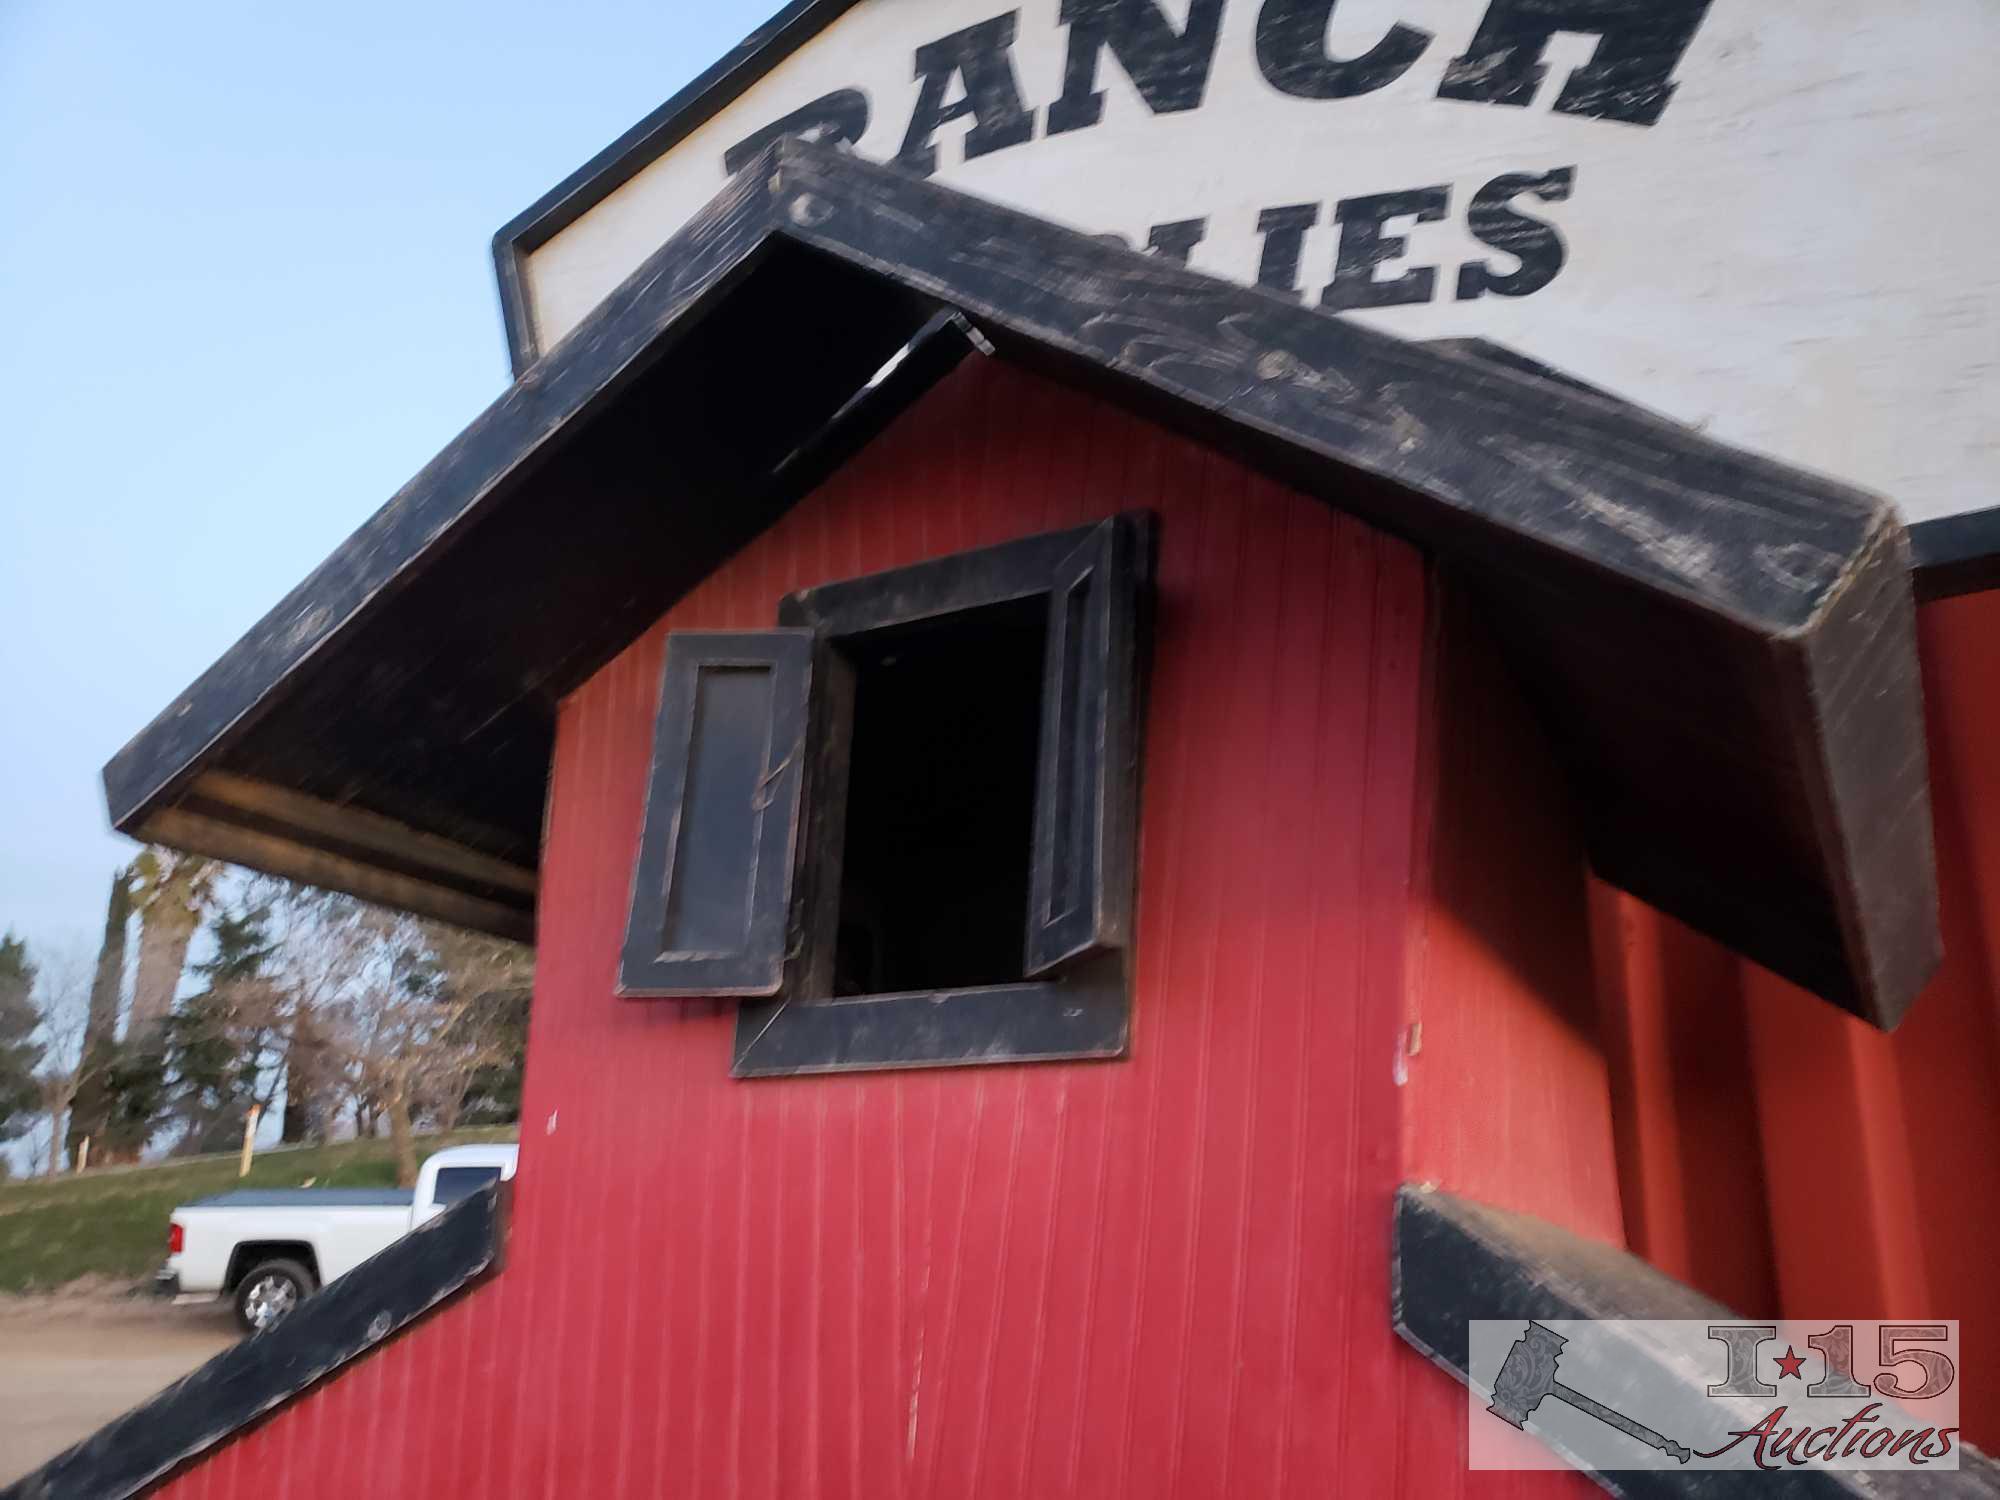 Ranch Supplies Sign With Mini Barn